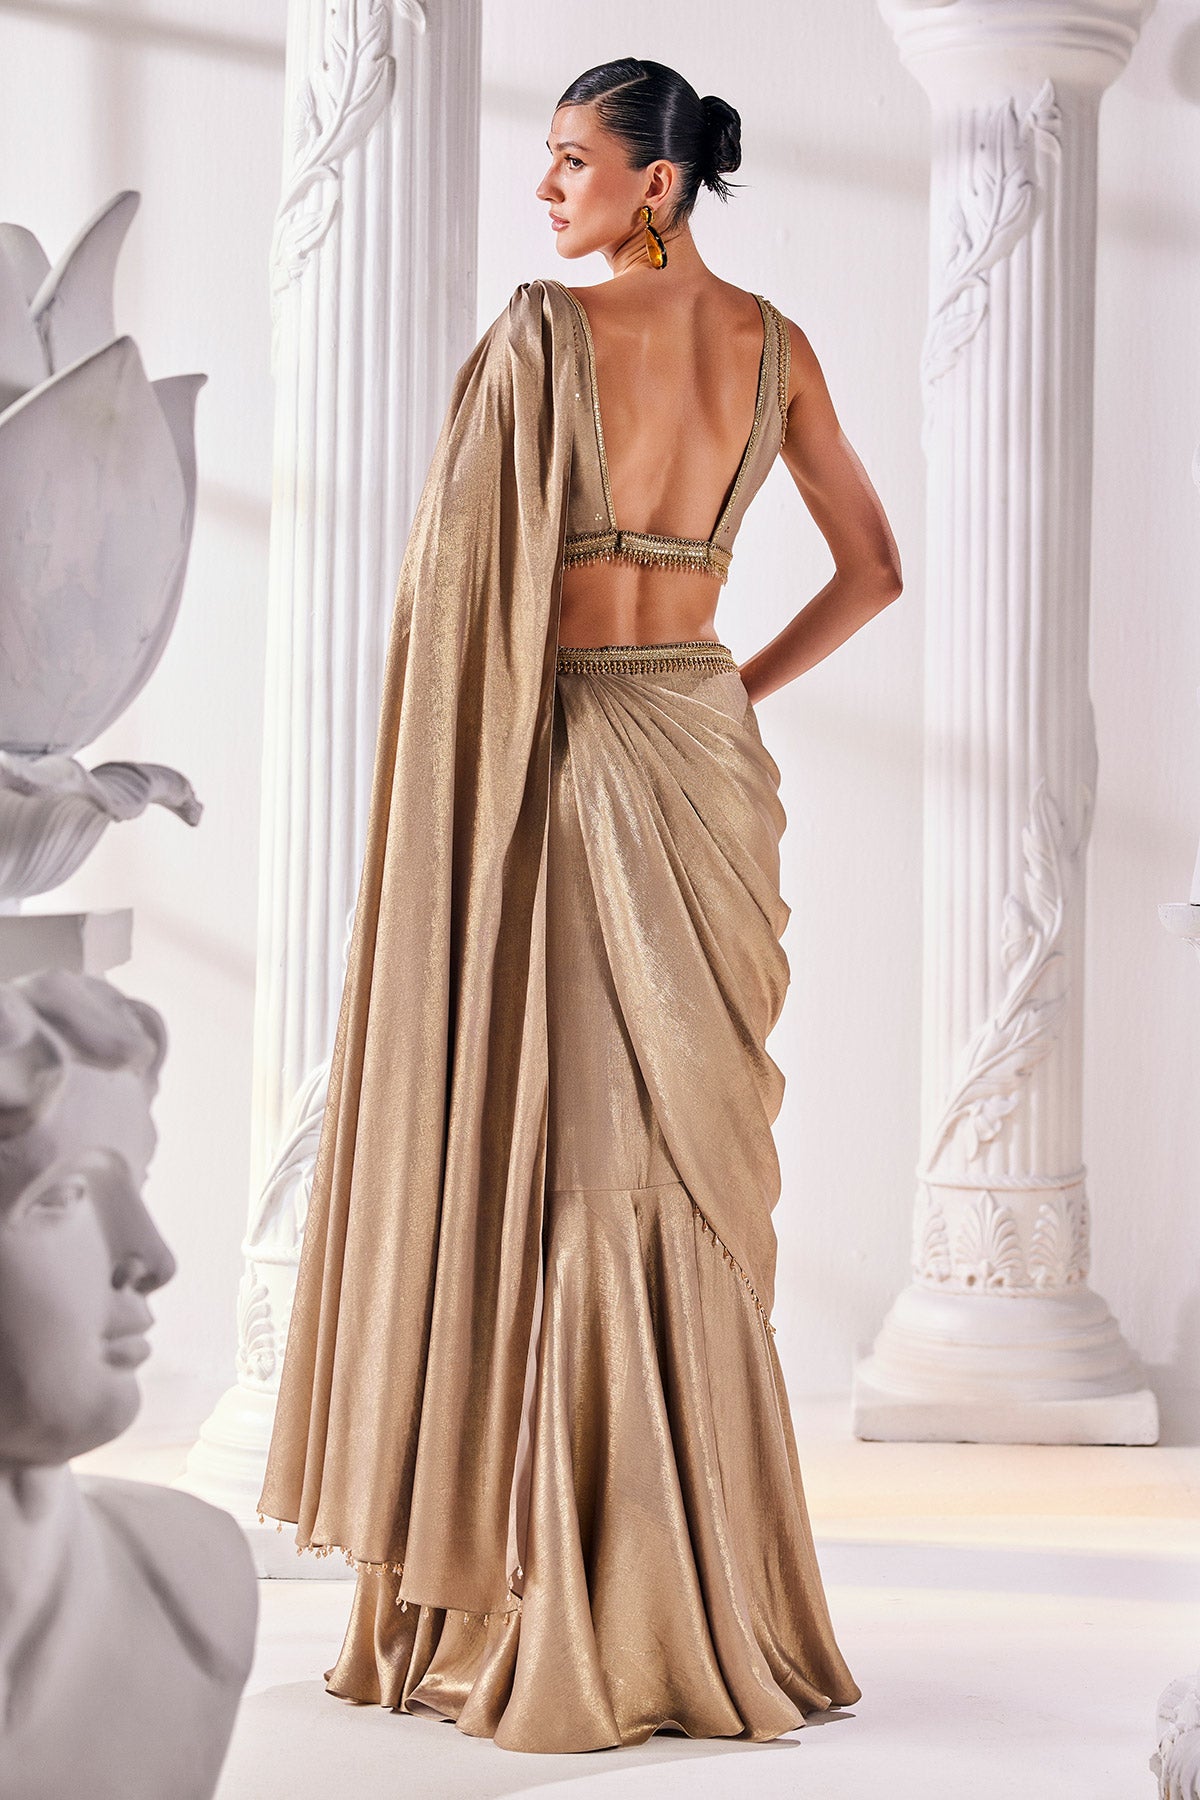 Mettalic Antique Gold Drape Saree With An Embellished Belt. It Is Paired With A Luxurious Metallic Blouse.